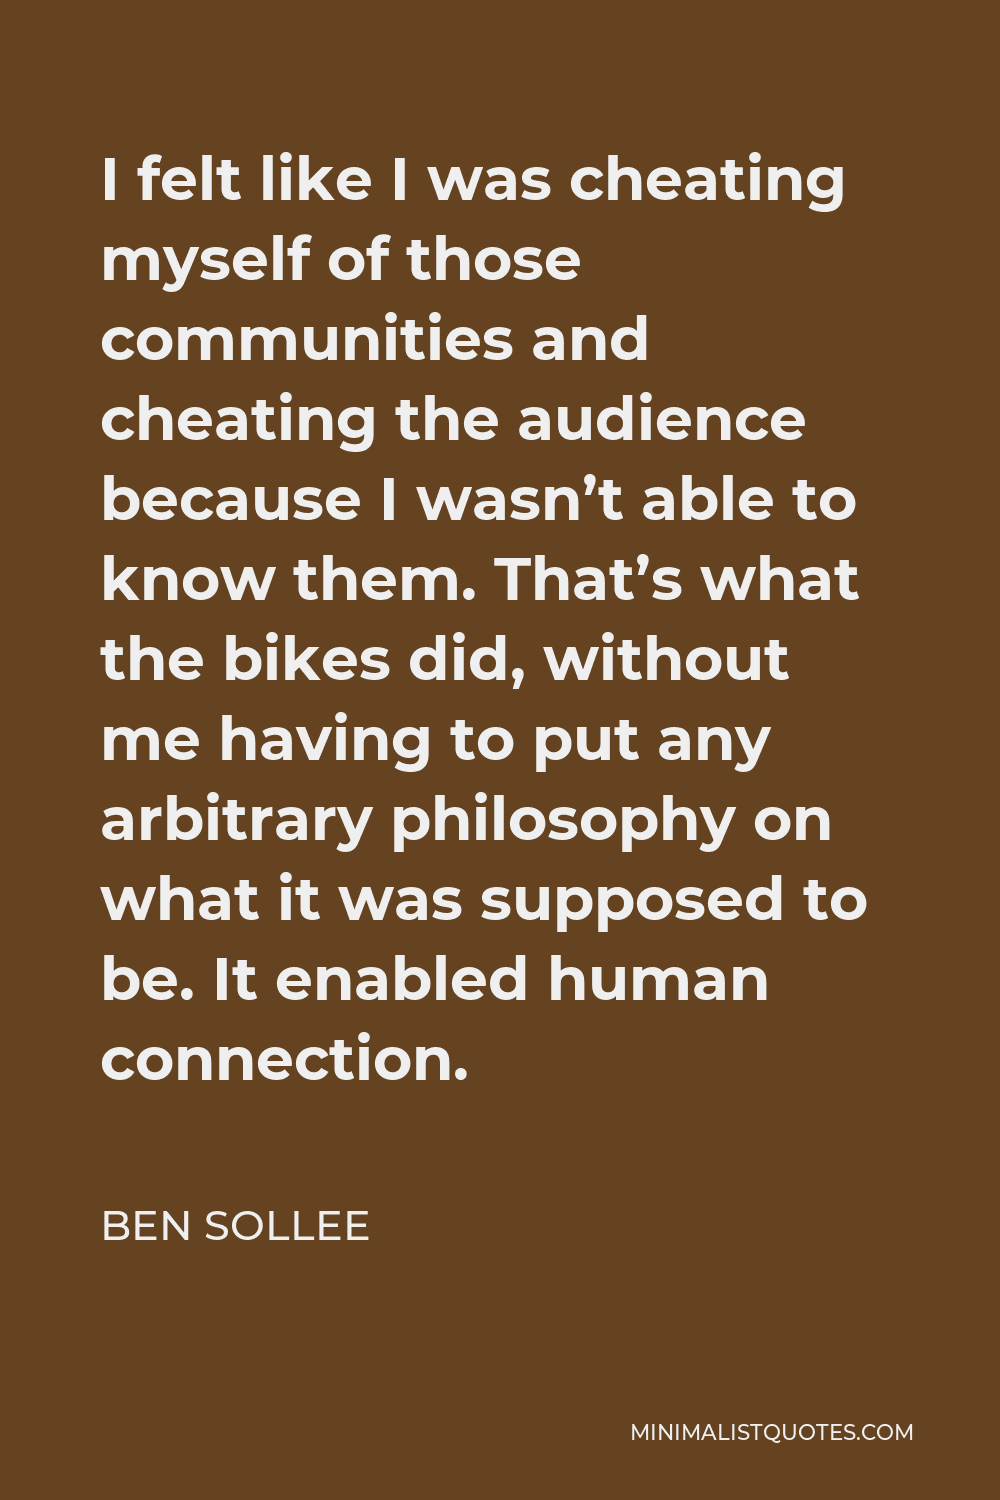 Ben Sollee Quote - I felt like I was cheating myself of those communities and cheating the audience because I wasn’t able to know them. That’s what the bikes did, without me having to put any arbitrary philosophy on what it was supposed to be. It enabled human connection.